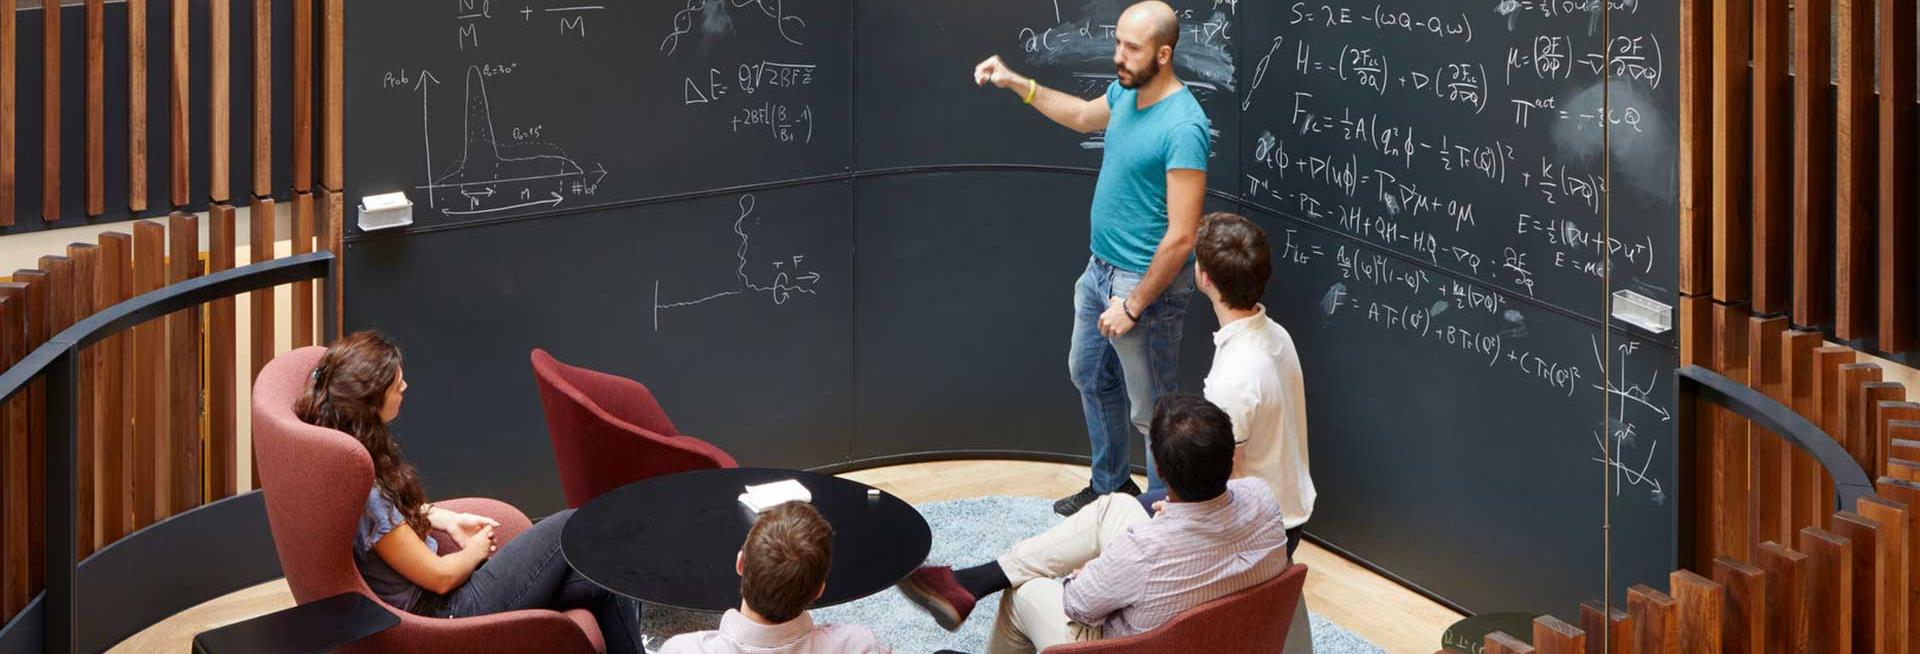 People around a blackboard discussing physics